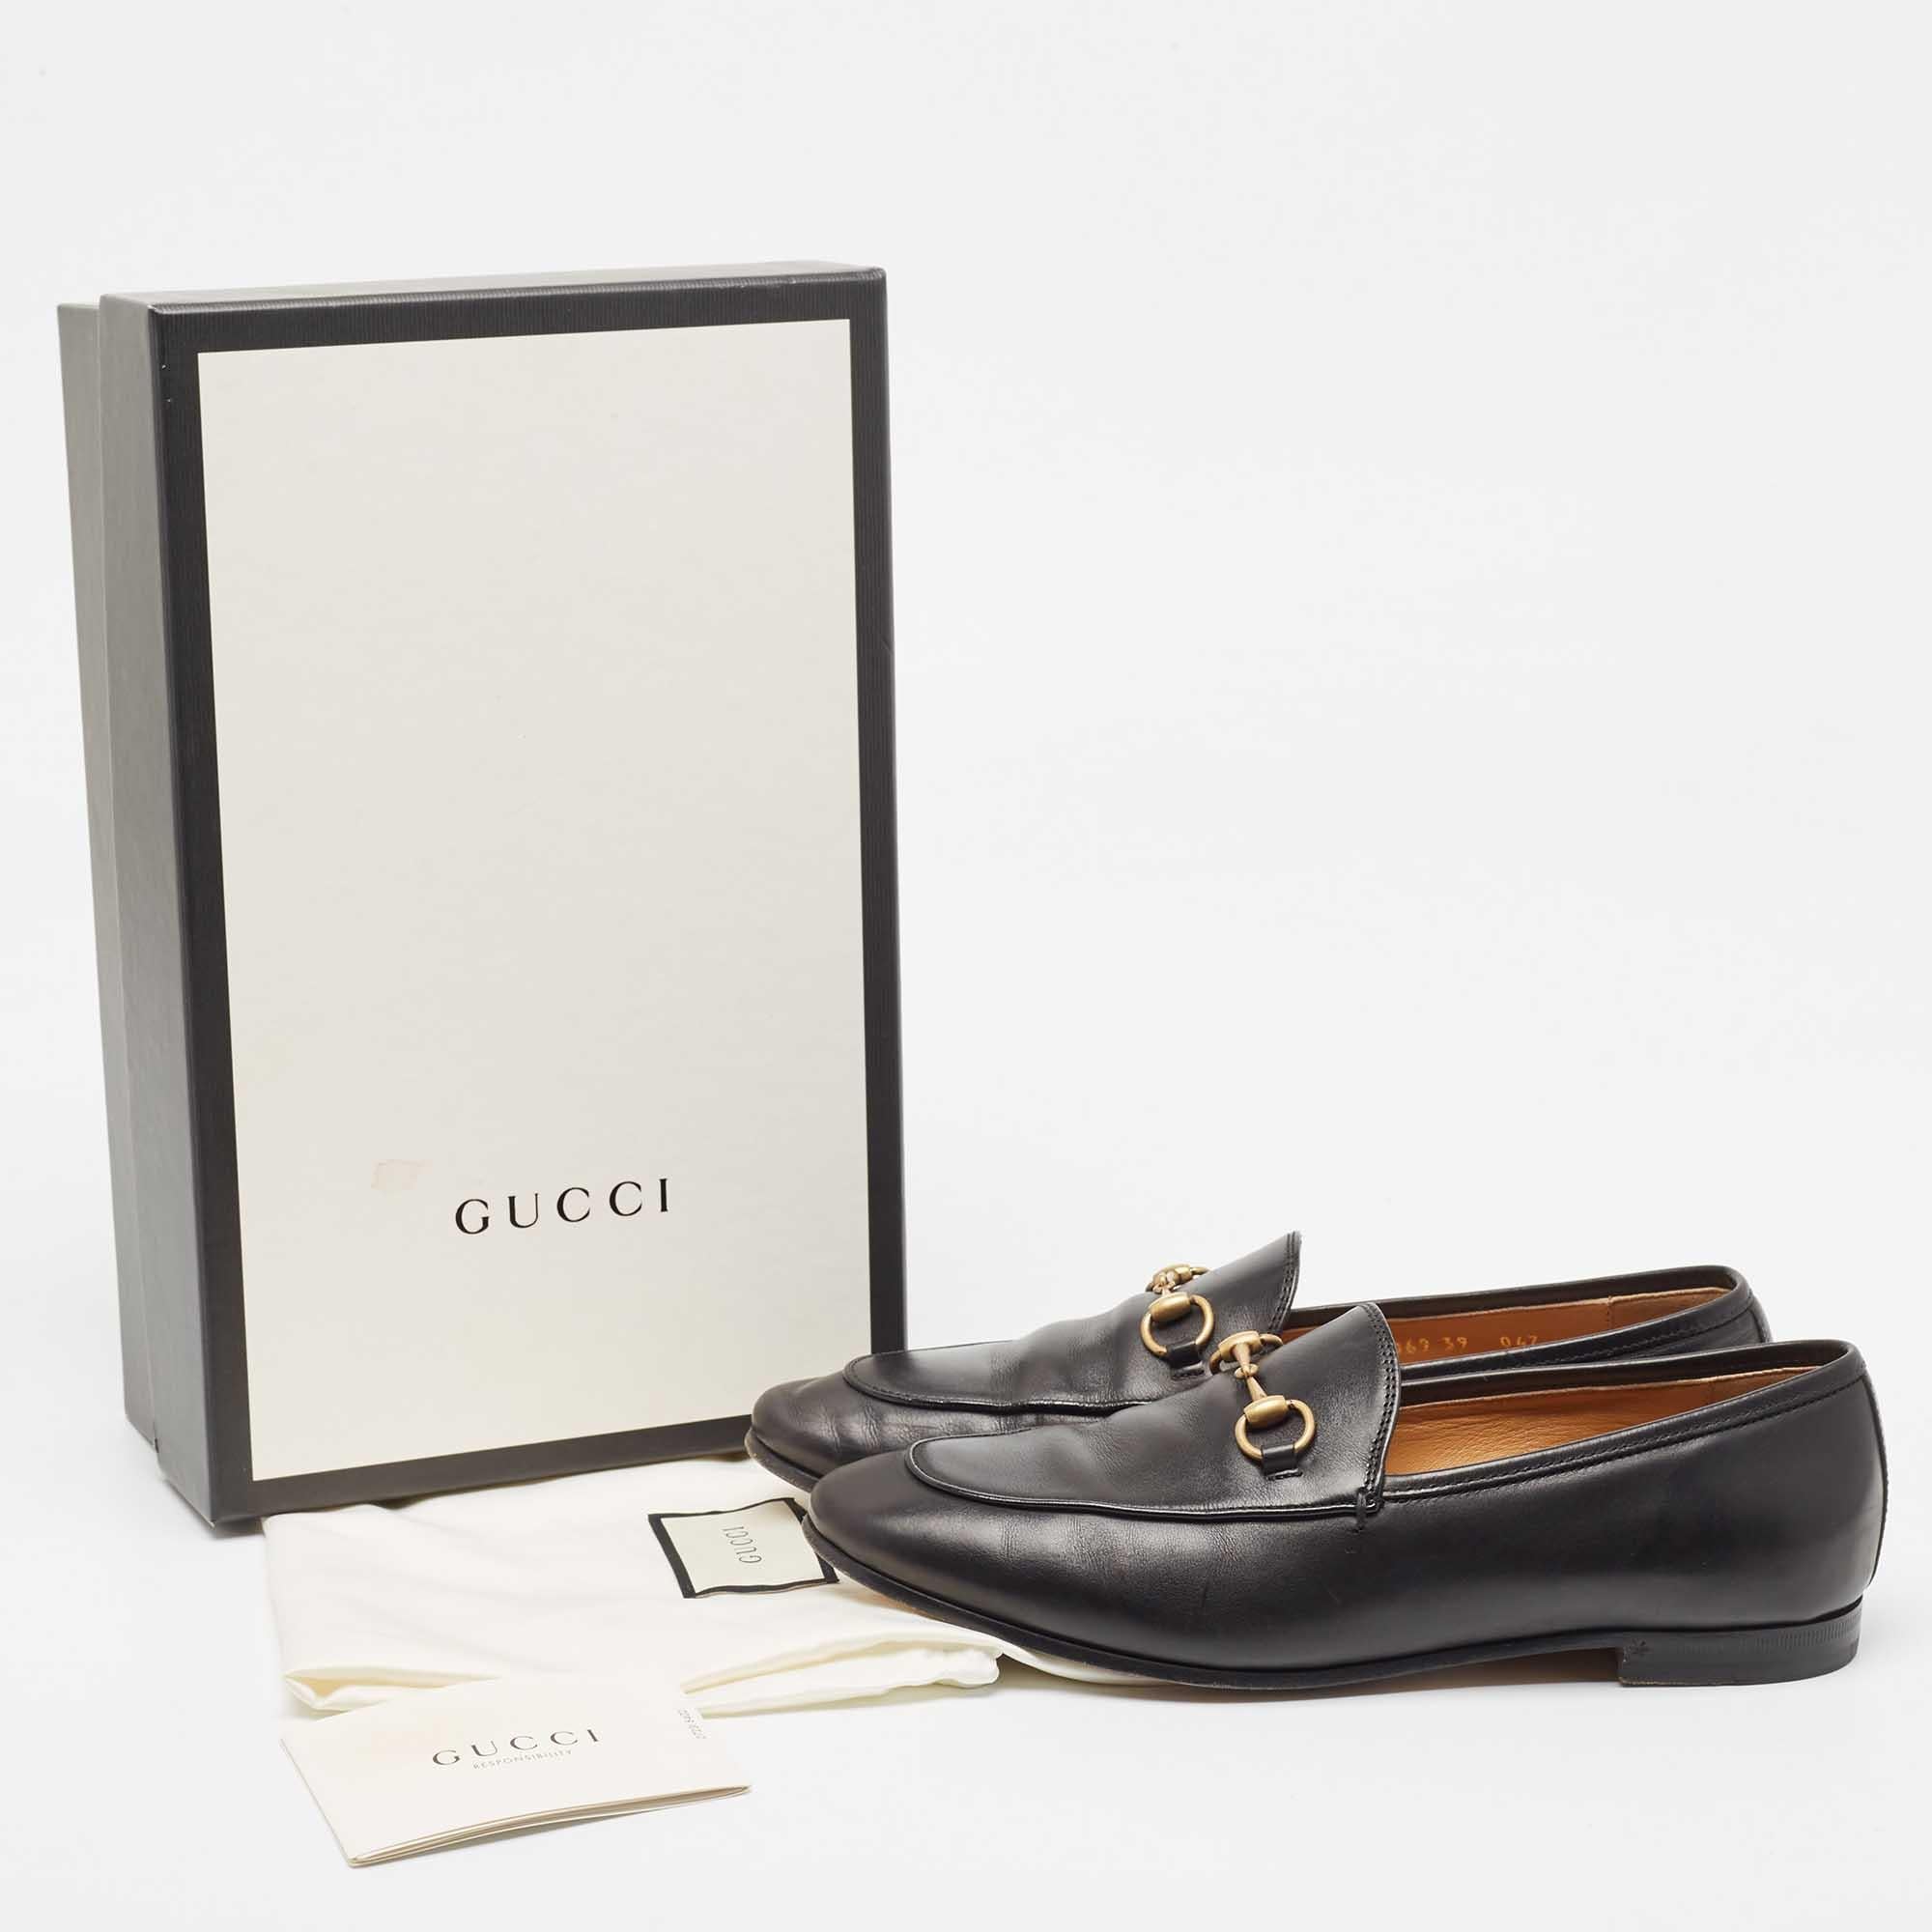 Gucci Black Leather Jordaan Loafers Size 39 5